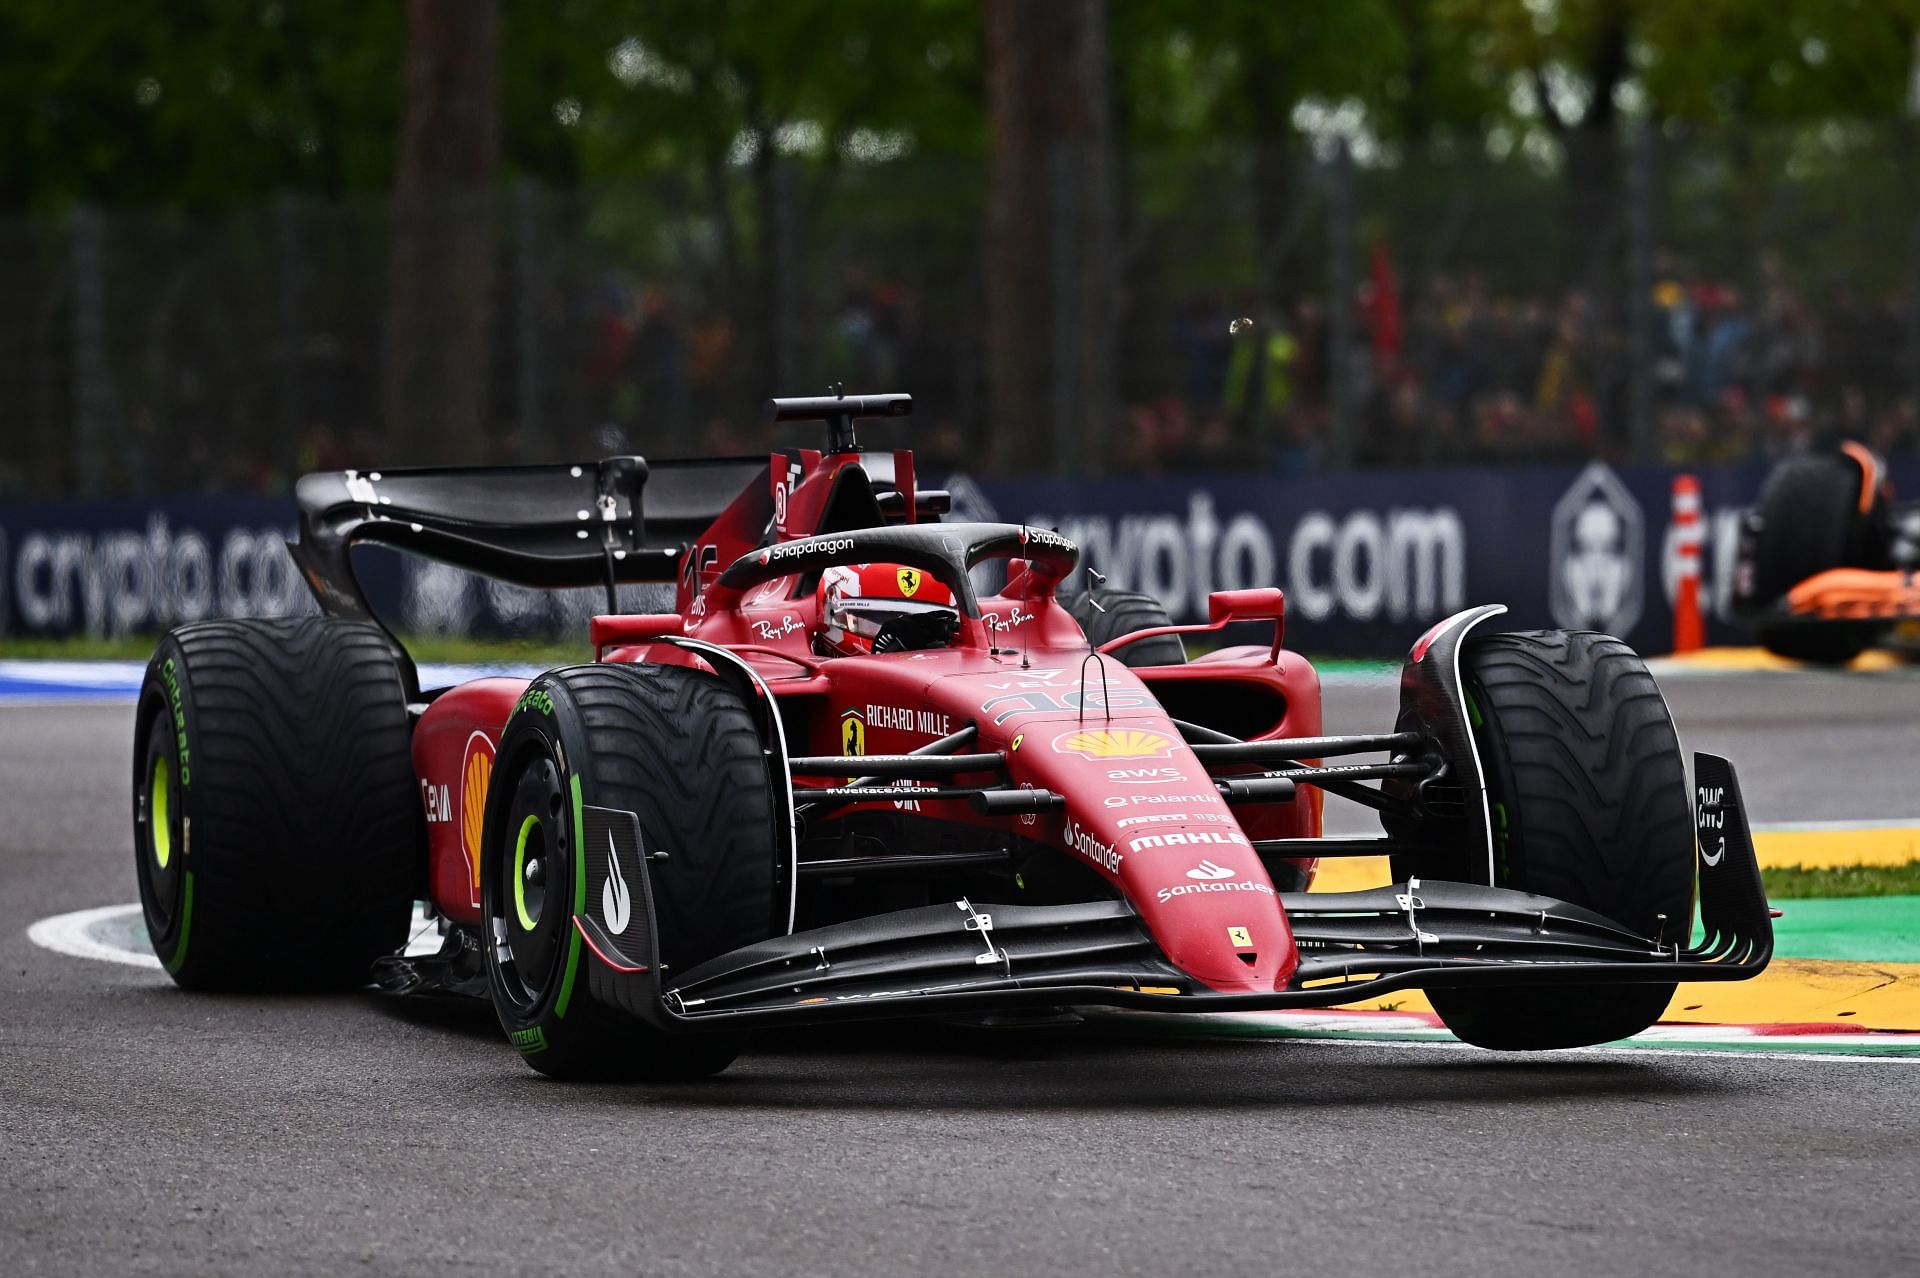 Ferrari&#039;s Charles Leclerc in action during the 2022 F1 Imola GP. (Photo by Clive Mason/Getty Images)